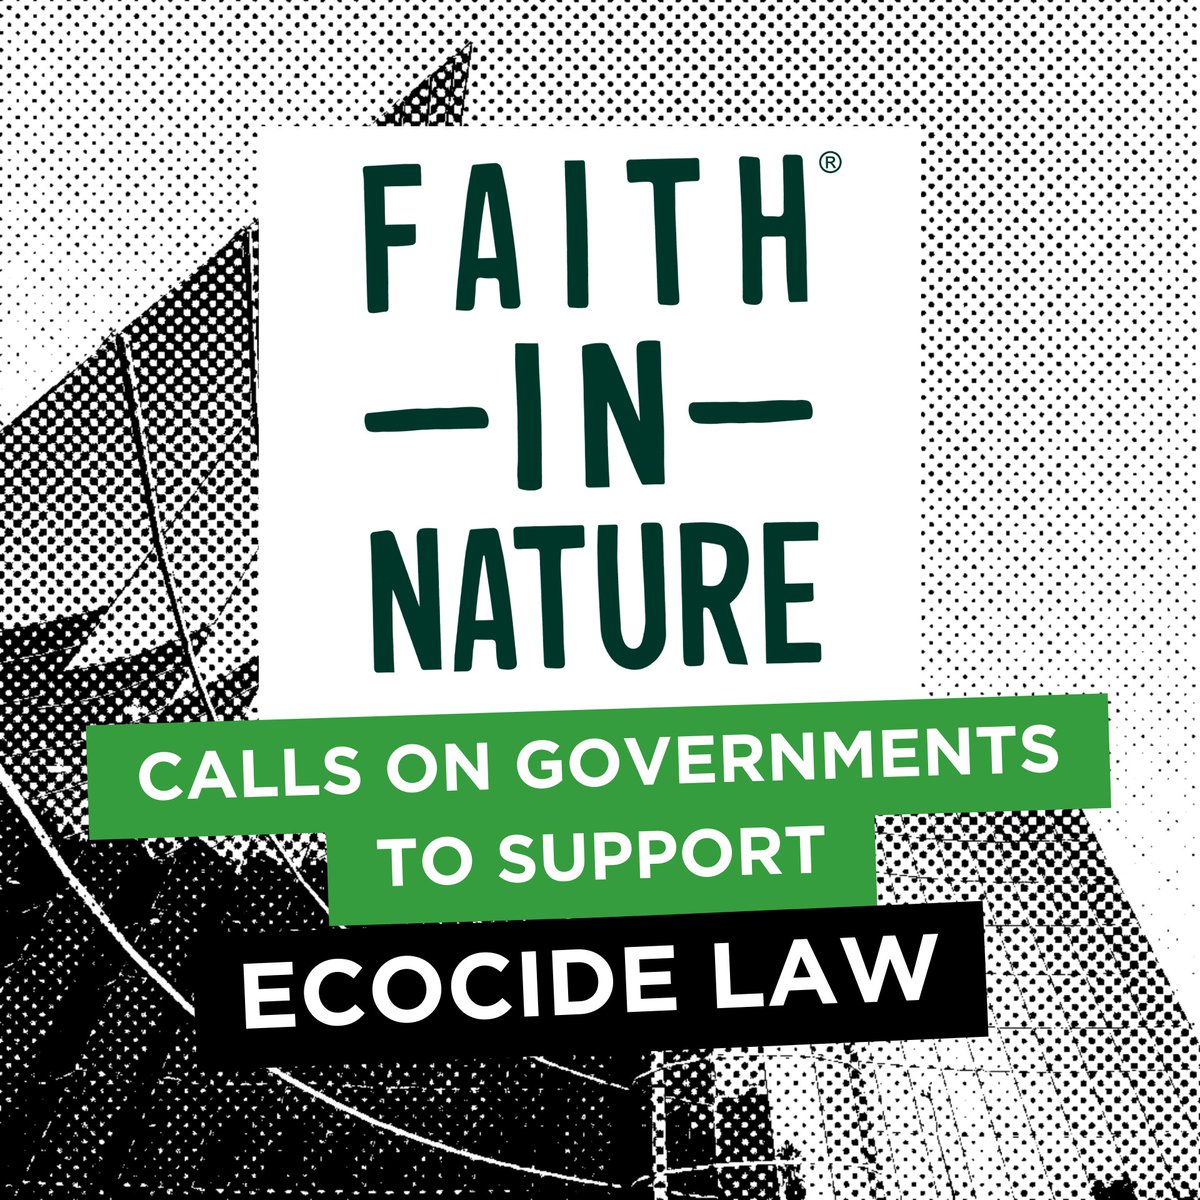 We are thrilled to have @FaithInNature - the 1st corporation in the world to make #nature a director of a company - in the Business for #EcocideLaw network! Share with you favourite thought-leading sustainable business TODAY: stopecocide.earth/business #StopEcocide